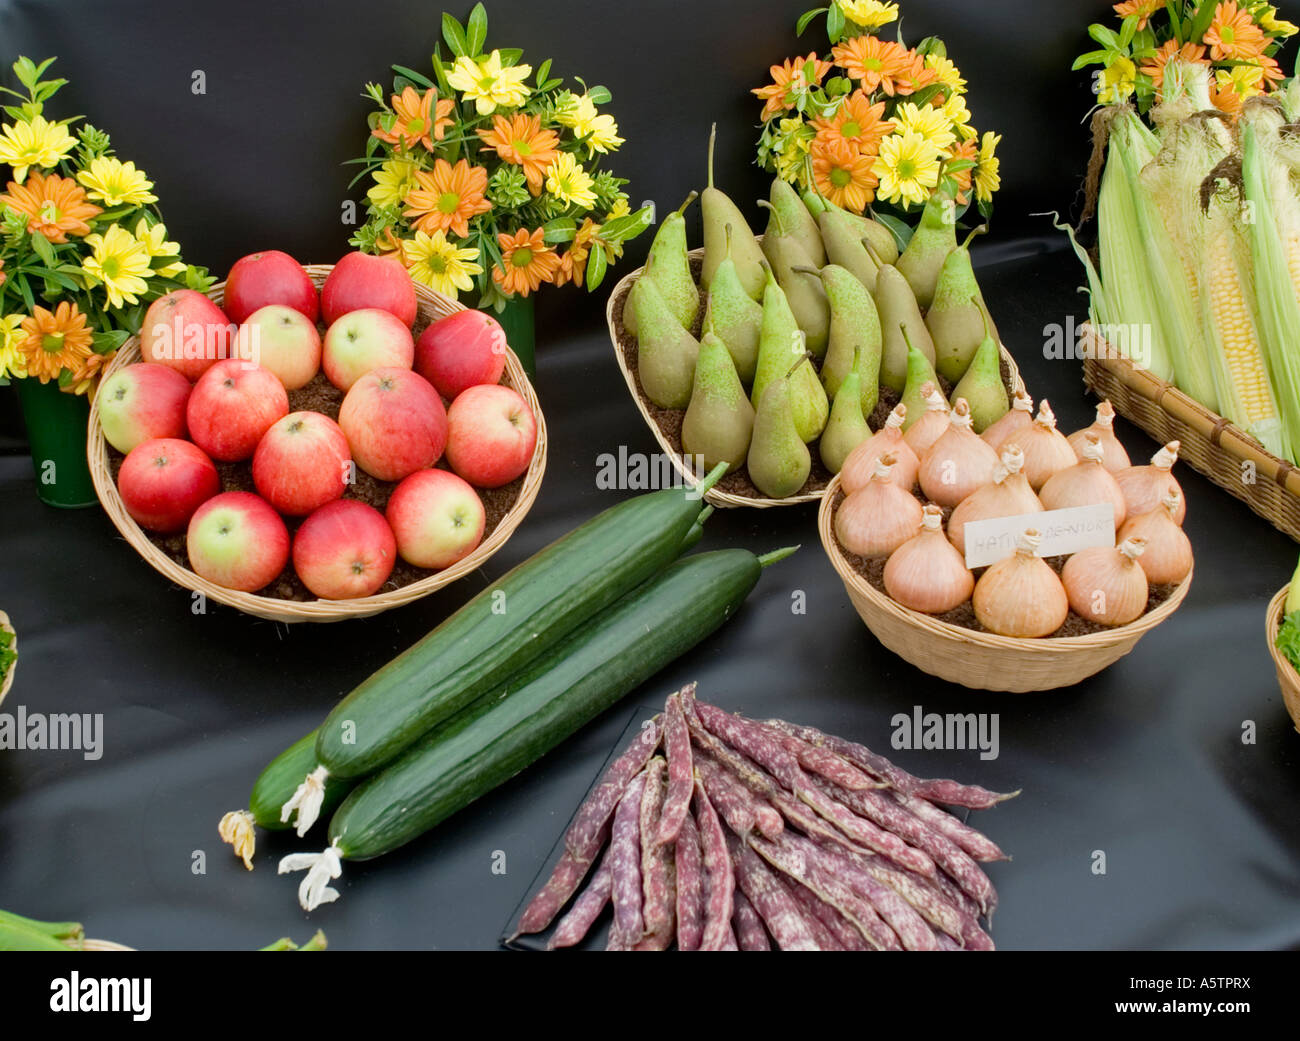 Display of fruit and vegetables at horticultural show, UK Stock Photo